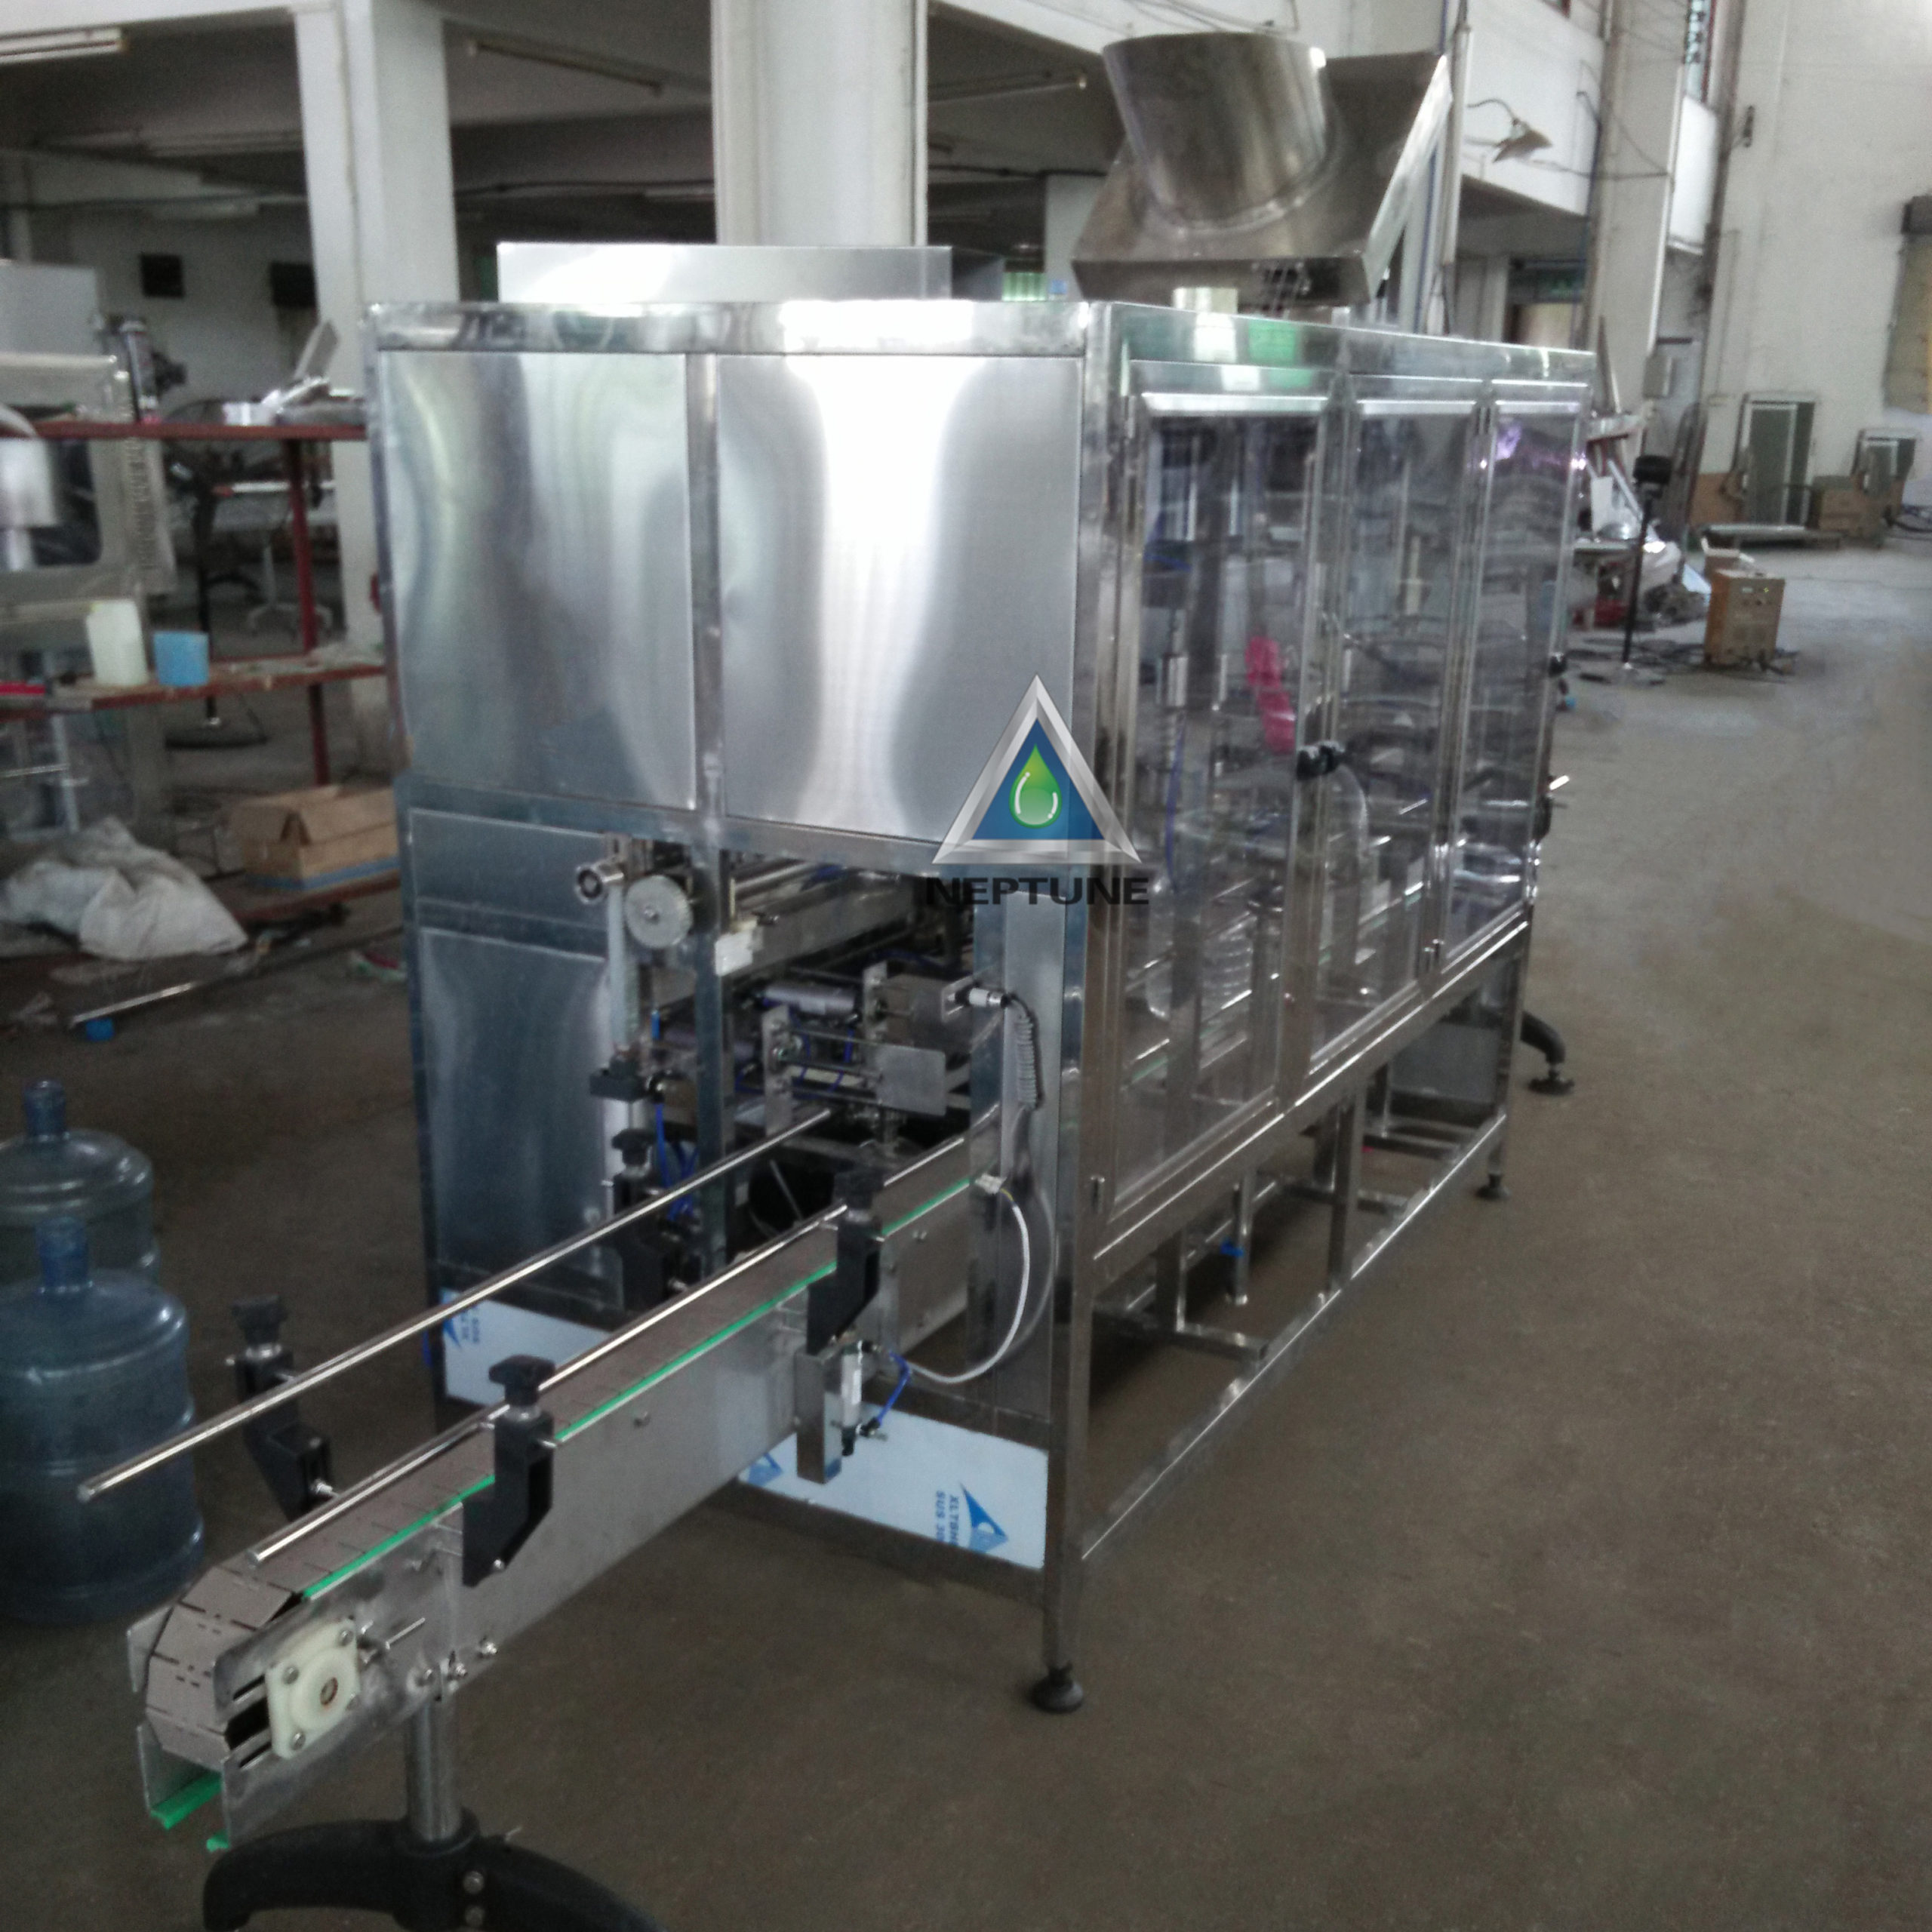 the really 1 gallon 2 gallon monoblock water bottling machine show in our factory